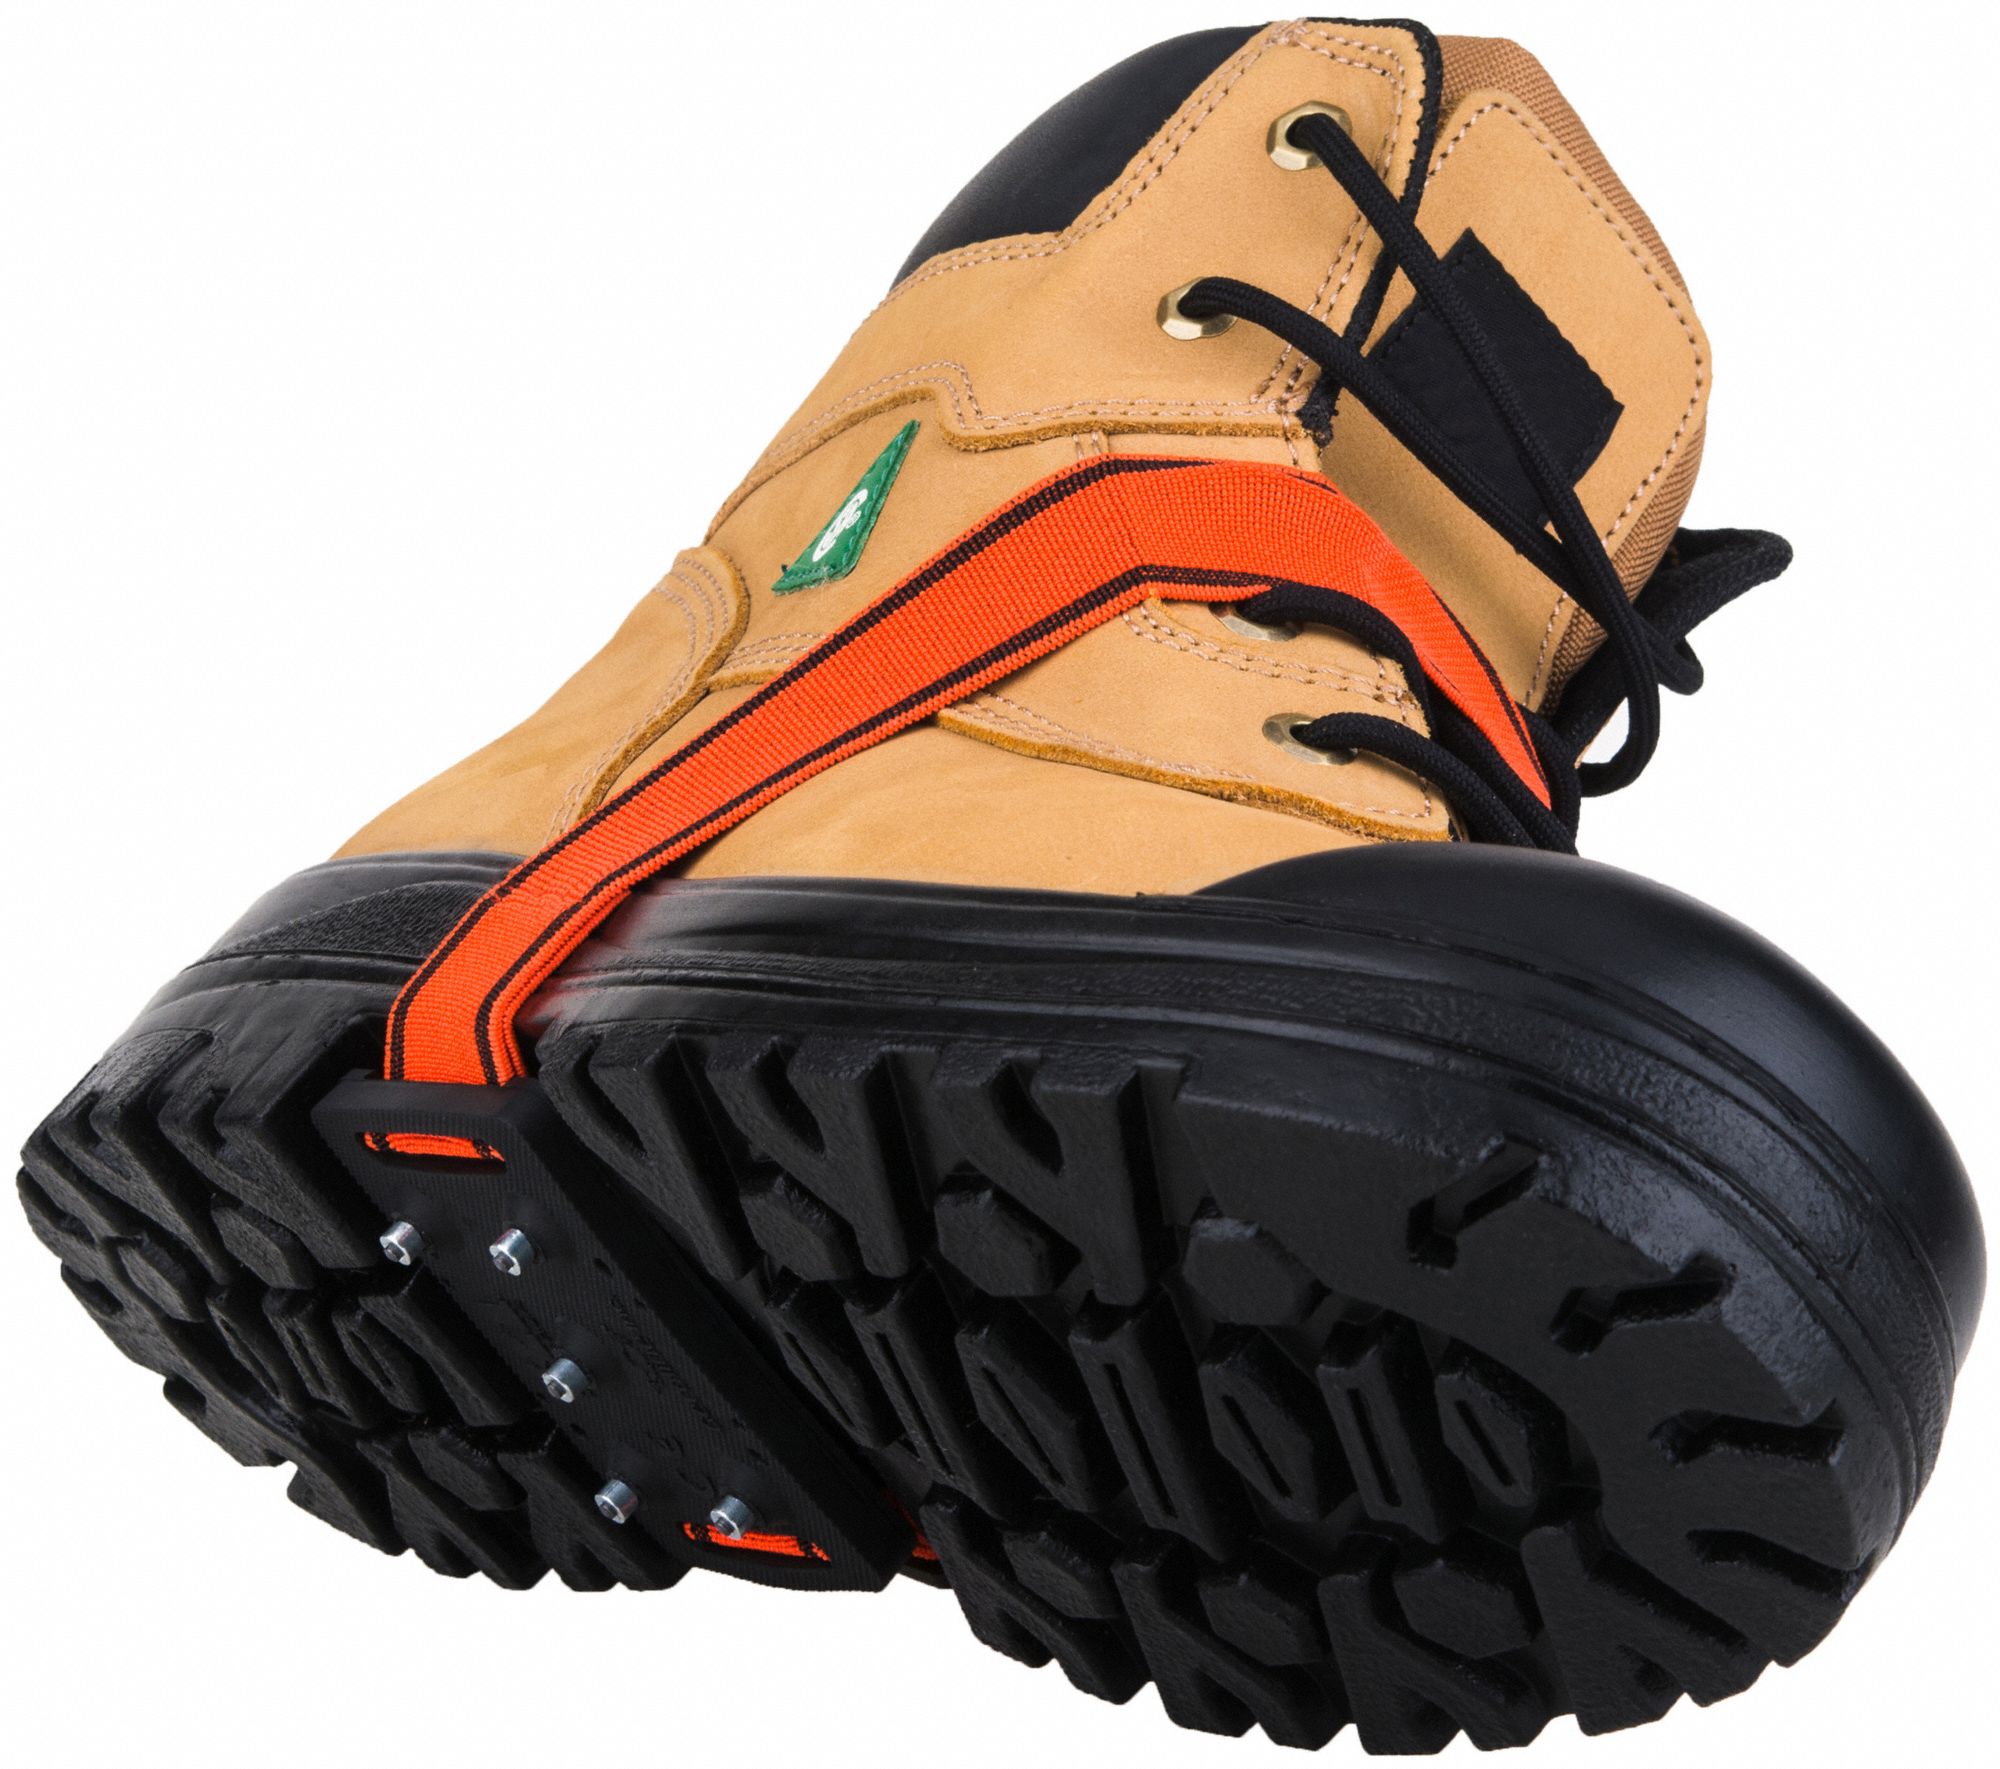 Traction Device: Mid-Sole Footwear Coverage, Rubber, Stud, 3 in L x 2-1/8 in W x 5/8 in H, 1 PR